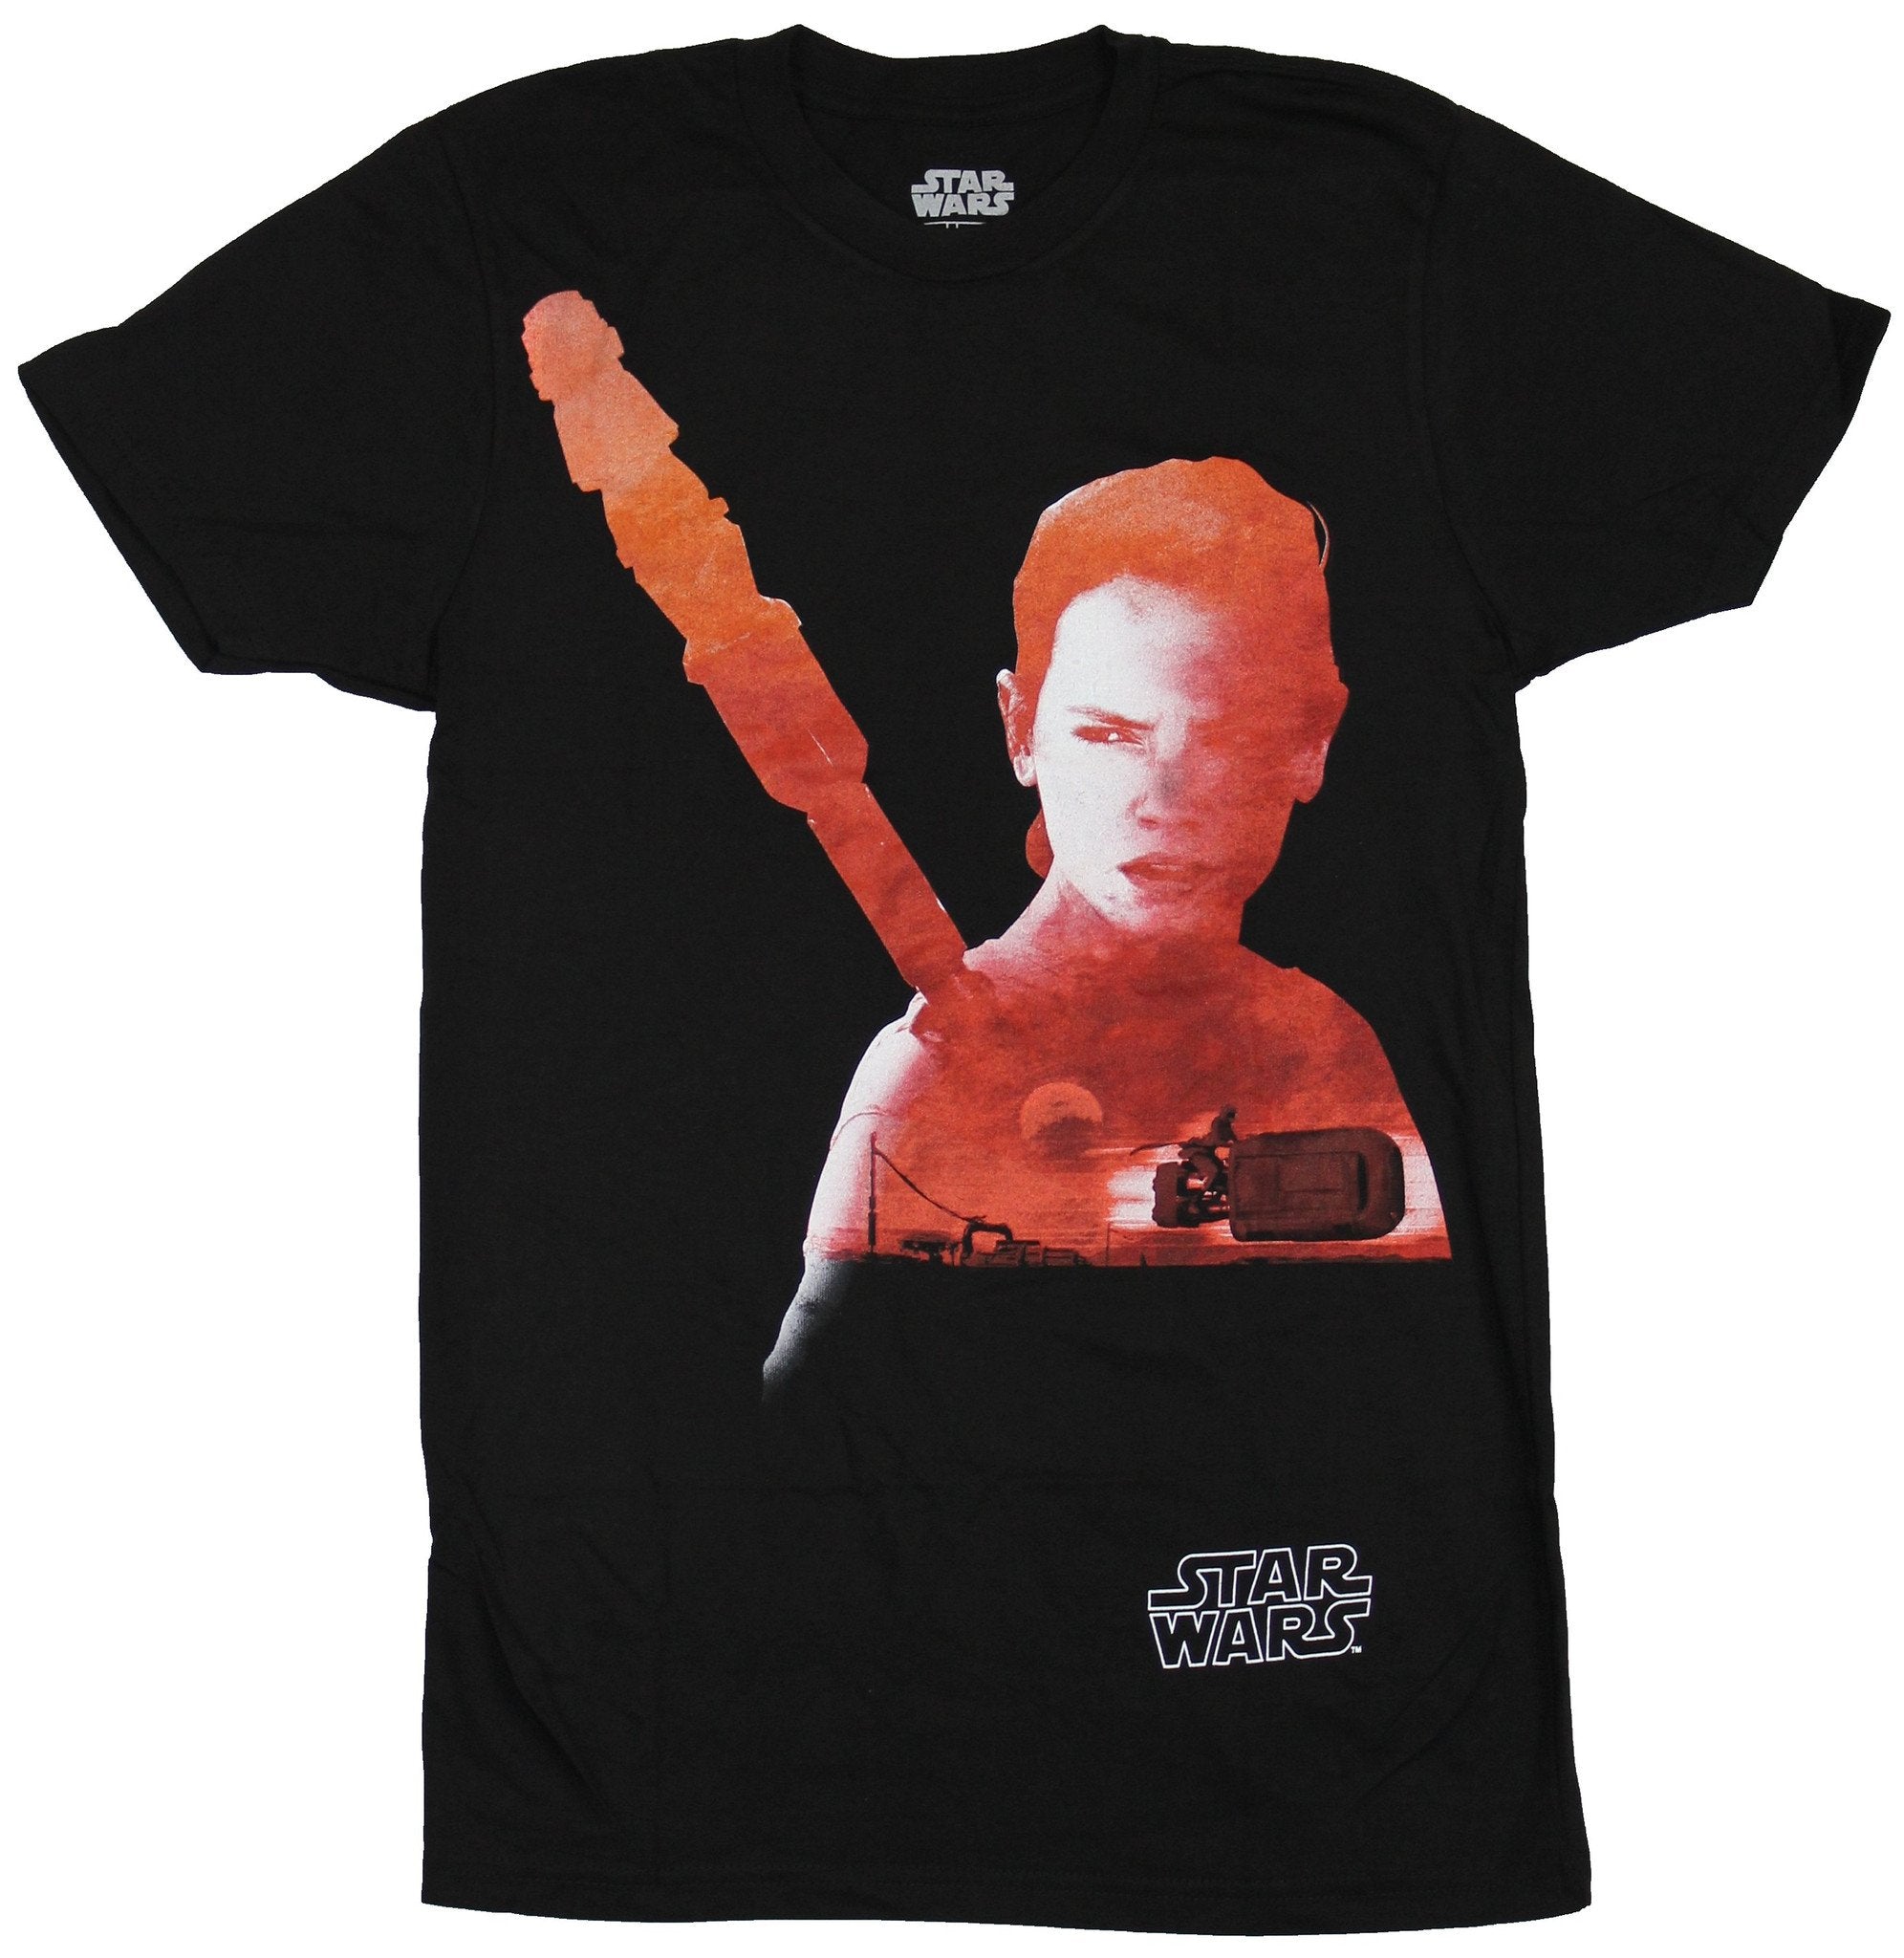 Star Wars Force Awakens Mens T-Shirt - Rey Filled With Red Sky Movie Image